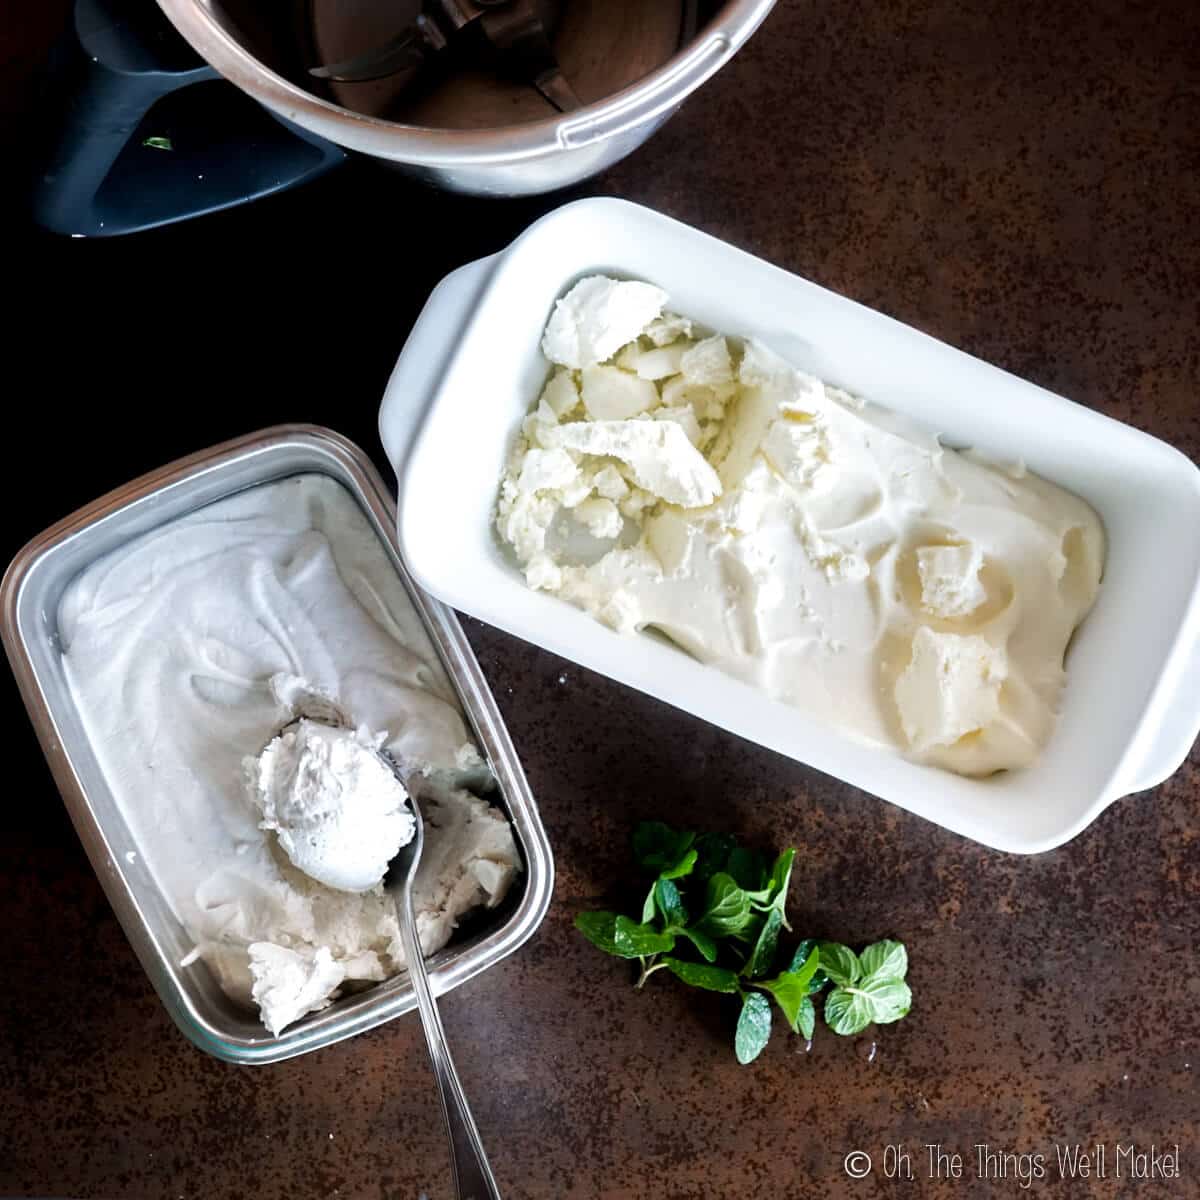 Overhead view of 2 homemade ice creams, one made with whipping cream, and the other, with a spoon in it, made with canned coconut cream.